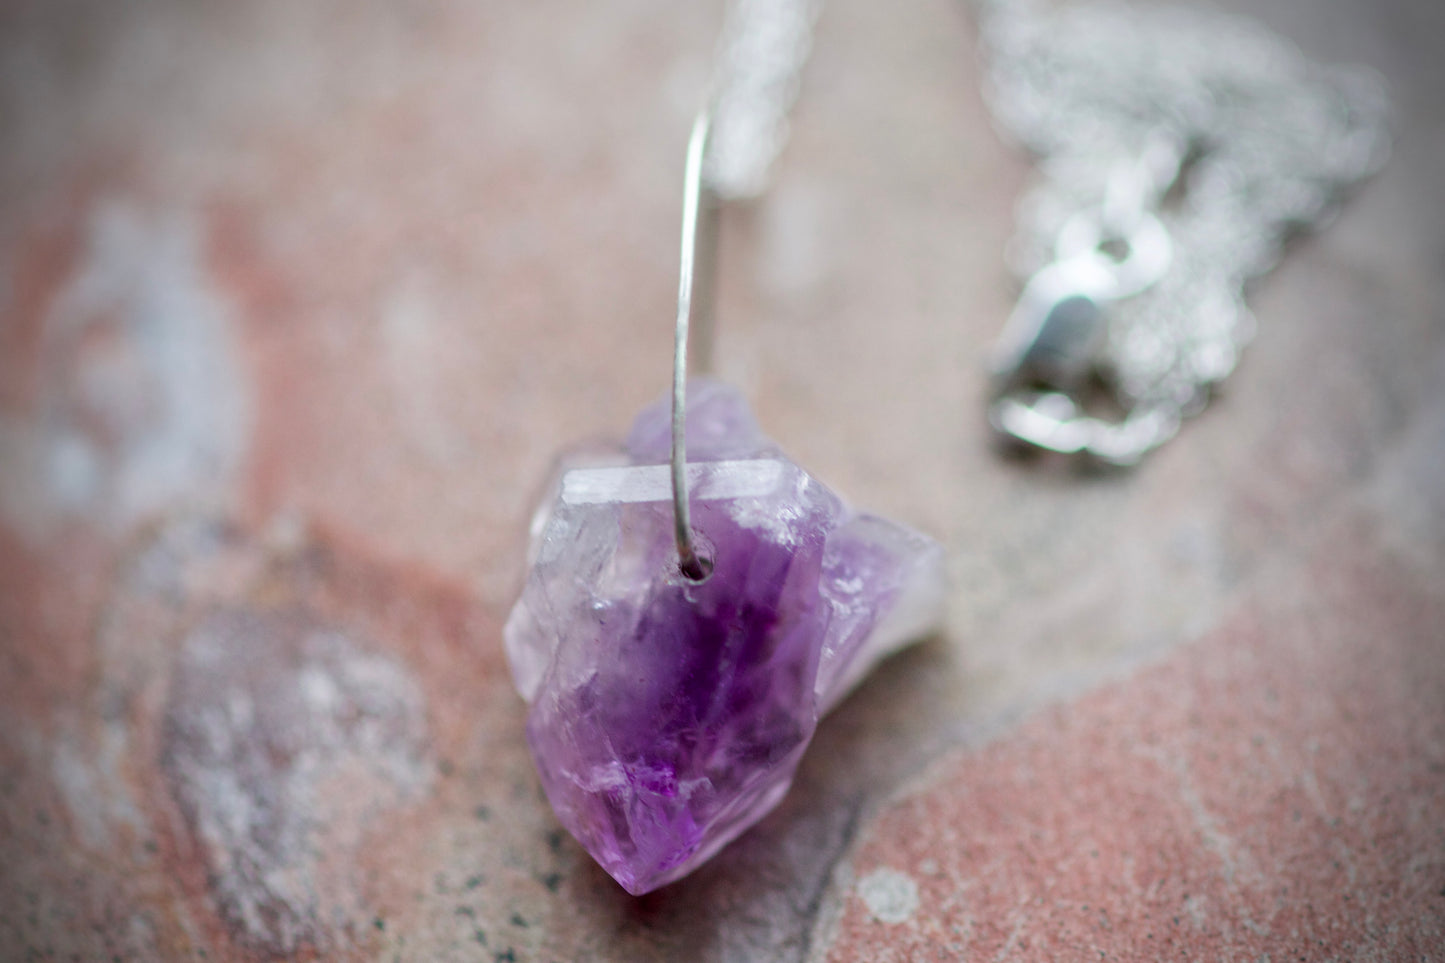 Petite Double Termination Amethyst Crystal and Sterling Silver Pendant Necklace